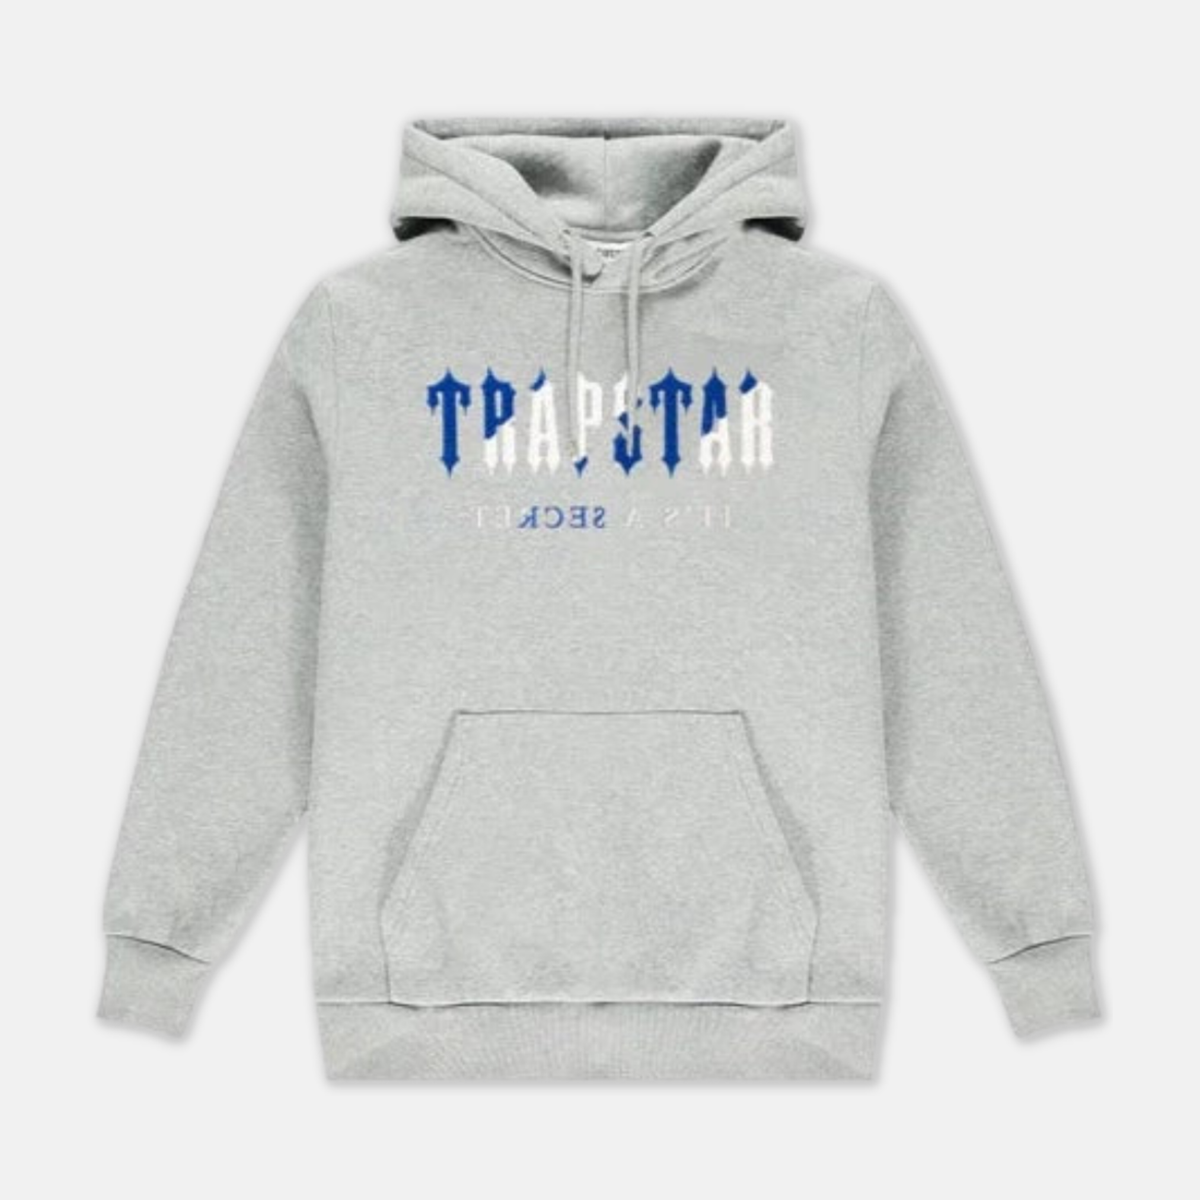 Trapstar Chenille Decoded Hoodie - Grey / Dazzling Blue - No Sauce The Plug